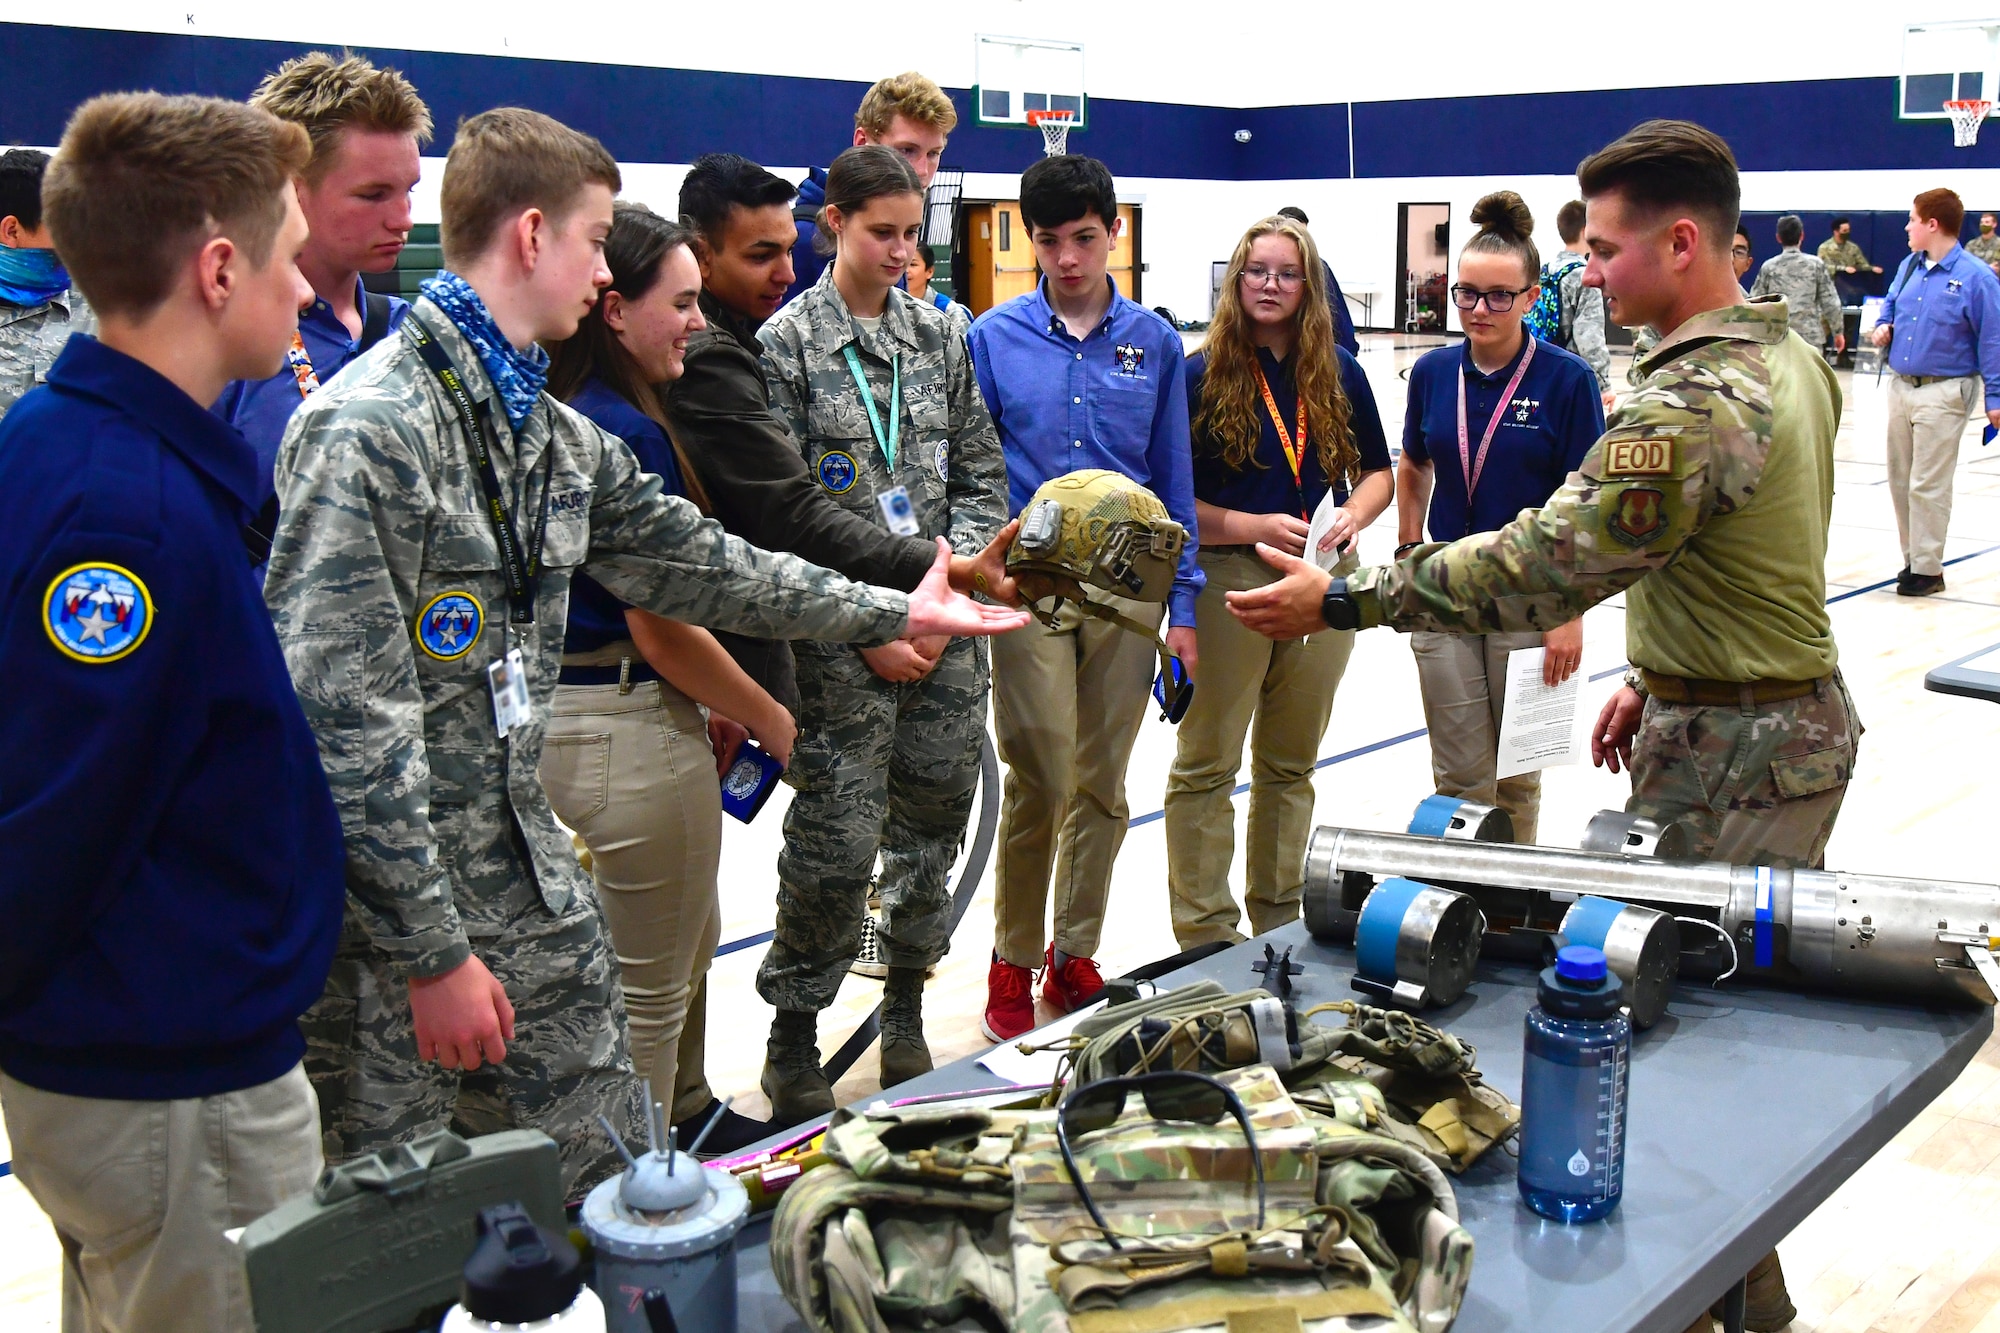 Airman First Class William Galuszka, 775th Civil Engineering Squadron, speaks with students about military equipment during a job fair at the Utah Military Academy, May 25, 2021, in Riverdale Utah. Airmen from Hill Air Force Base recently hosted the event at the nearby charter high school to educate and inspire students, as well as promote interest in the possibility of future military careers. (U.S. Air Force photo by Todd Cromar)